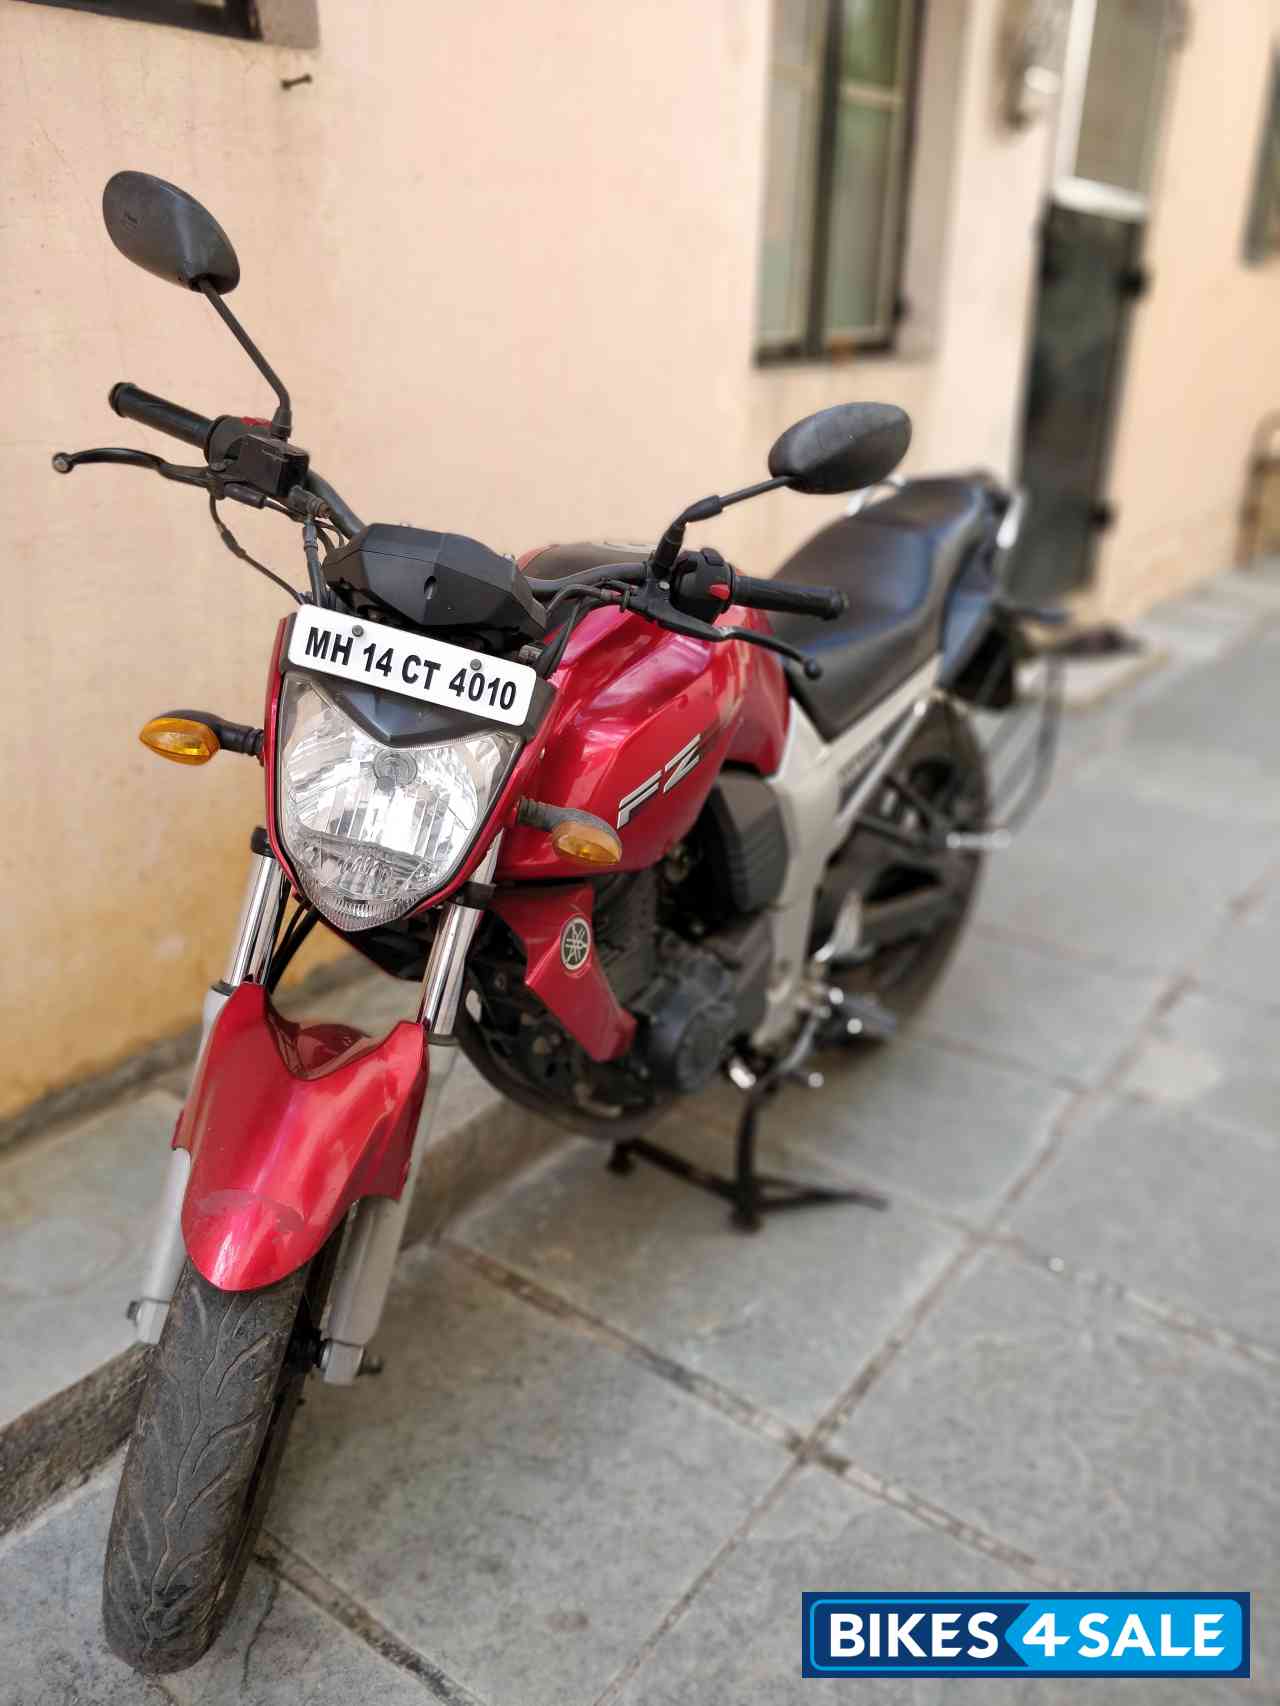 Used 2011 model Yamaha FZ16 for sale in Pune. ID 241571 - Bikes4Sale